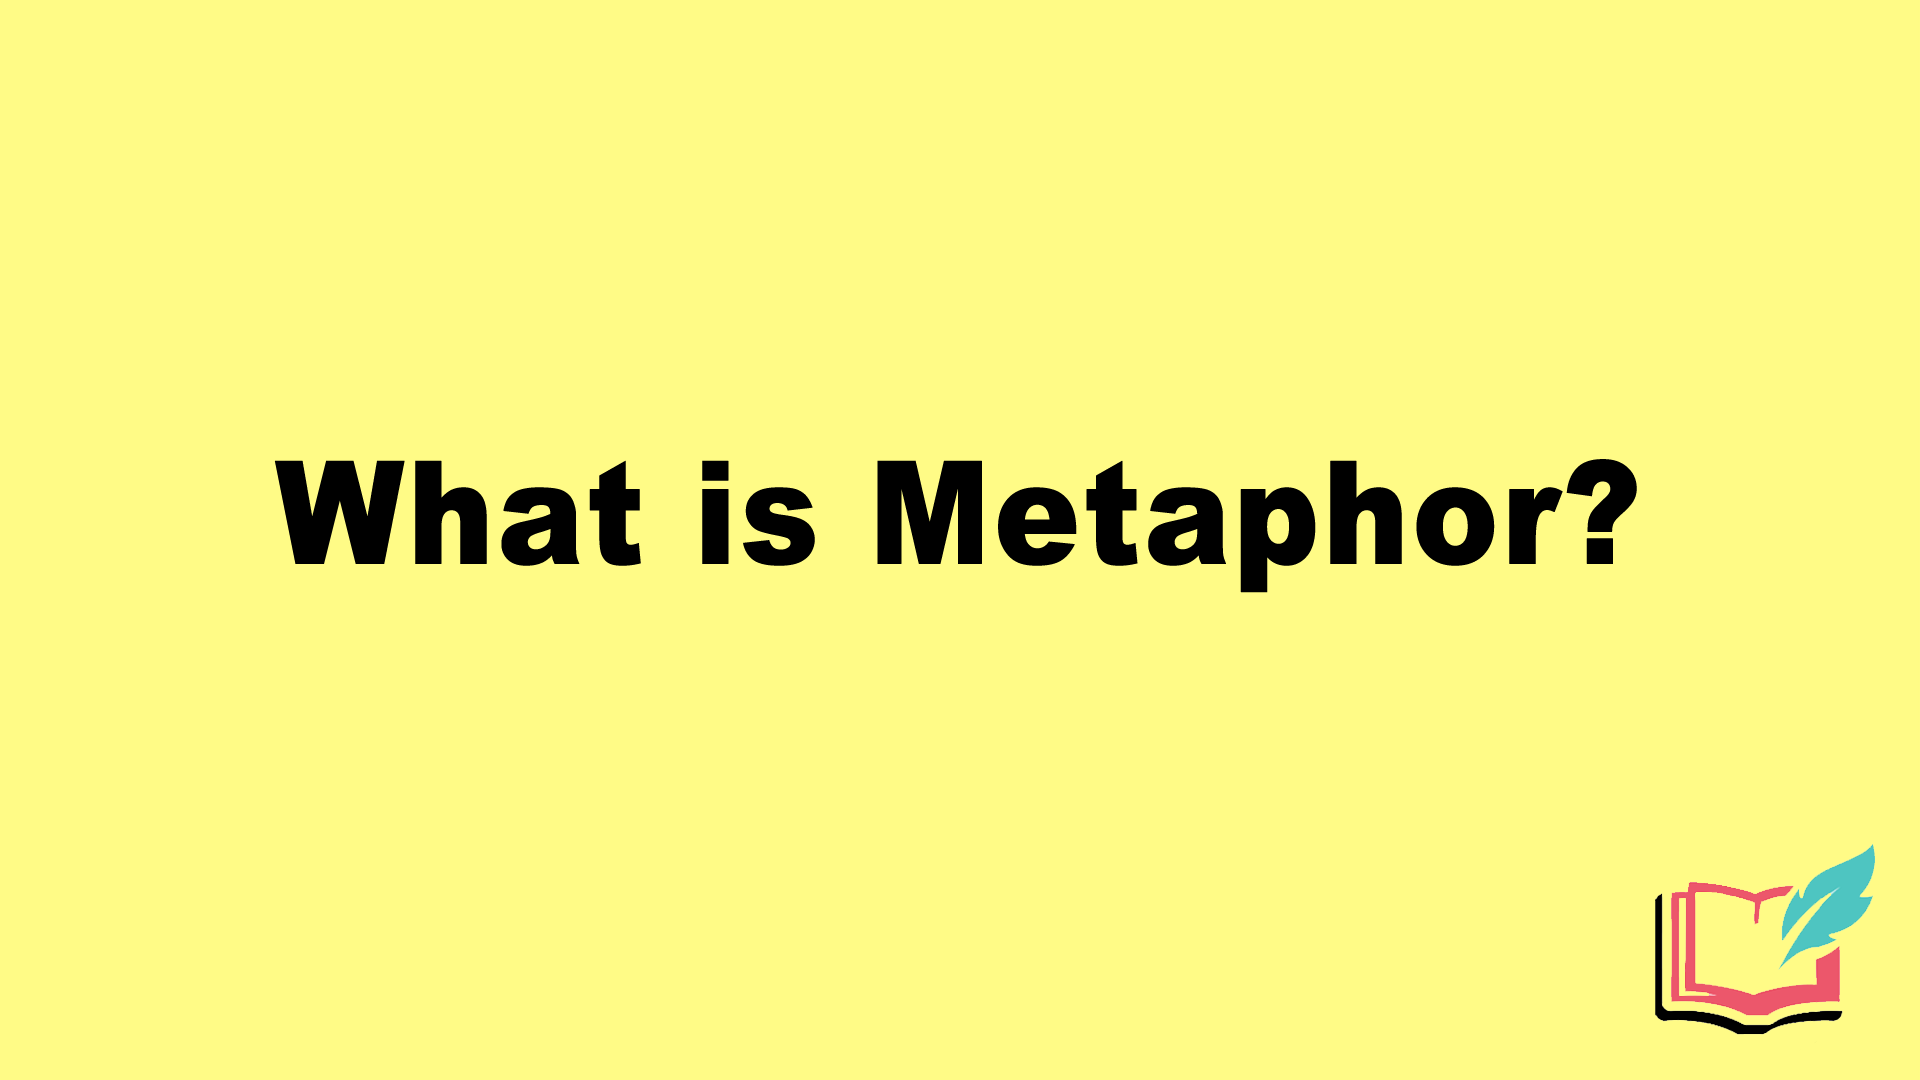 Metaphor: definition, types, and examples - Writer